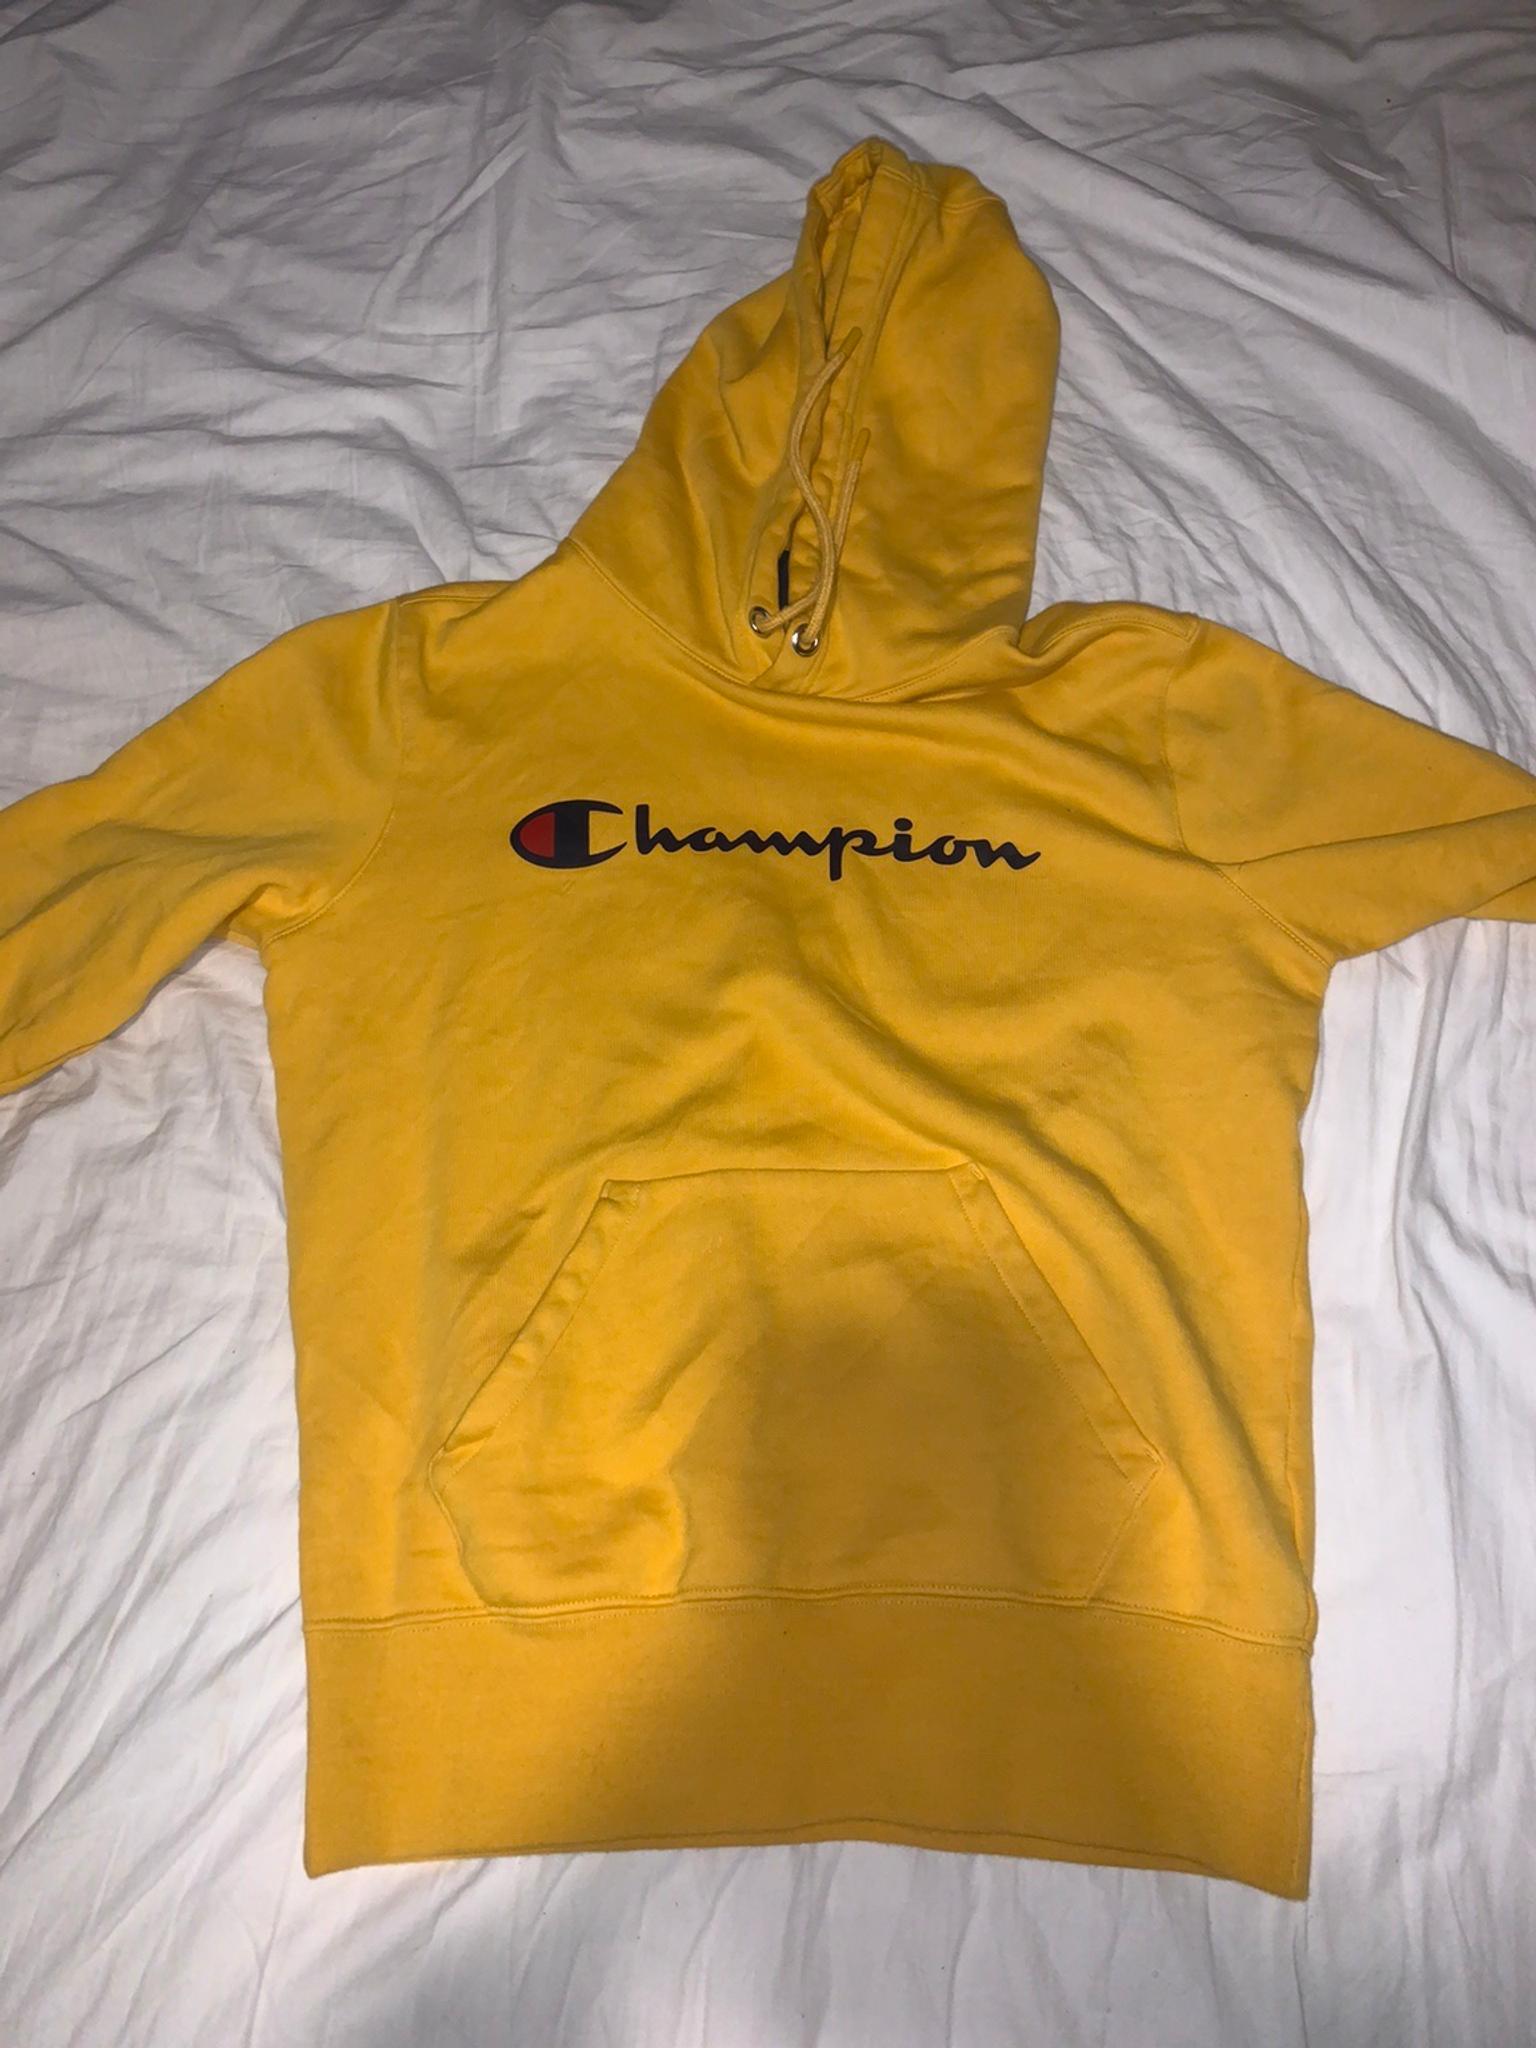 who bought champion clothing